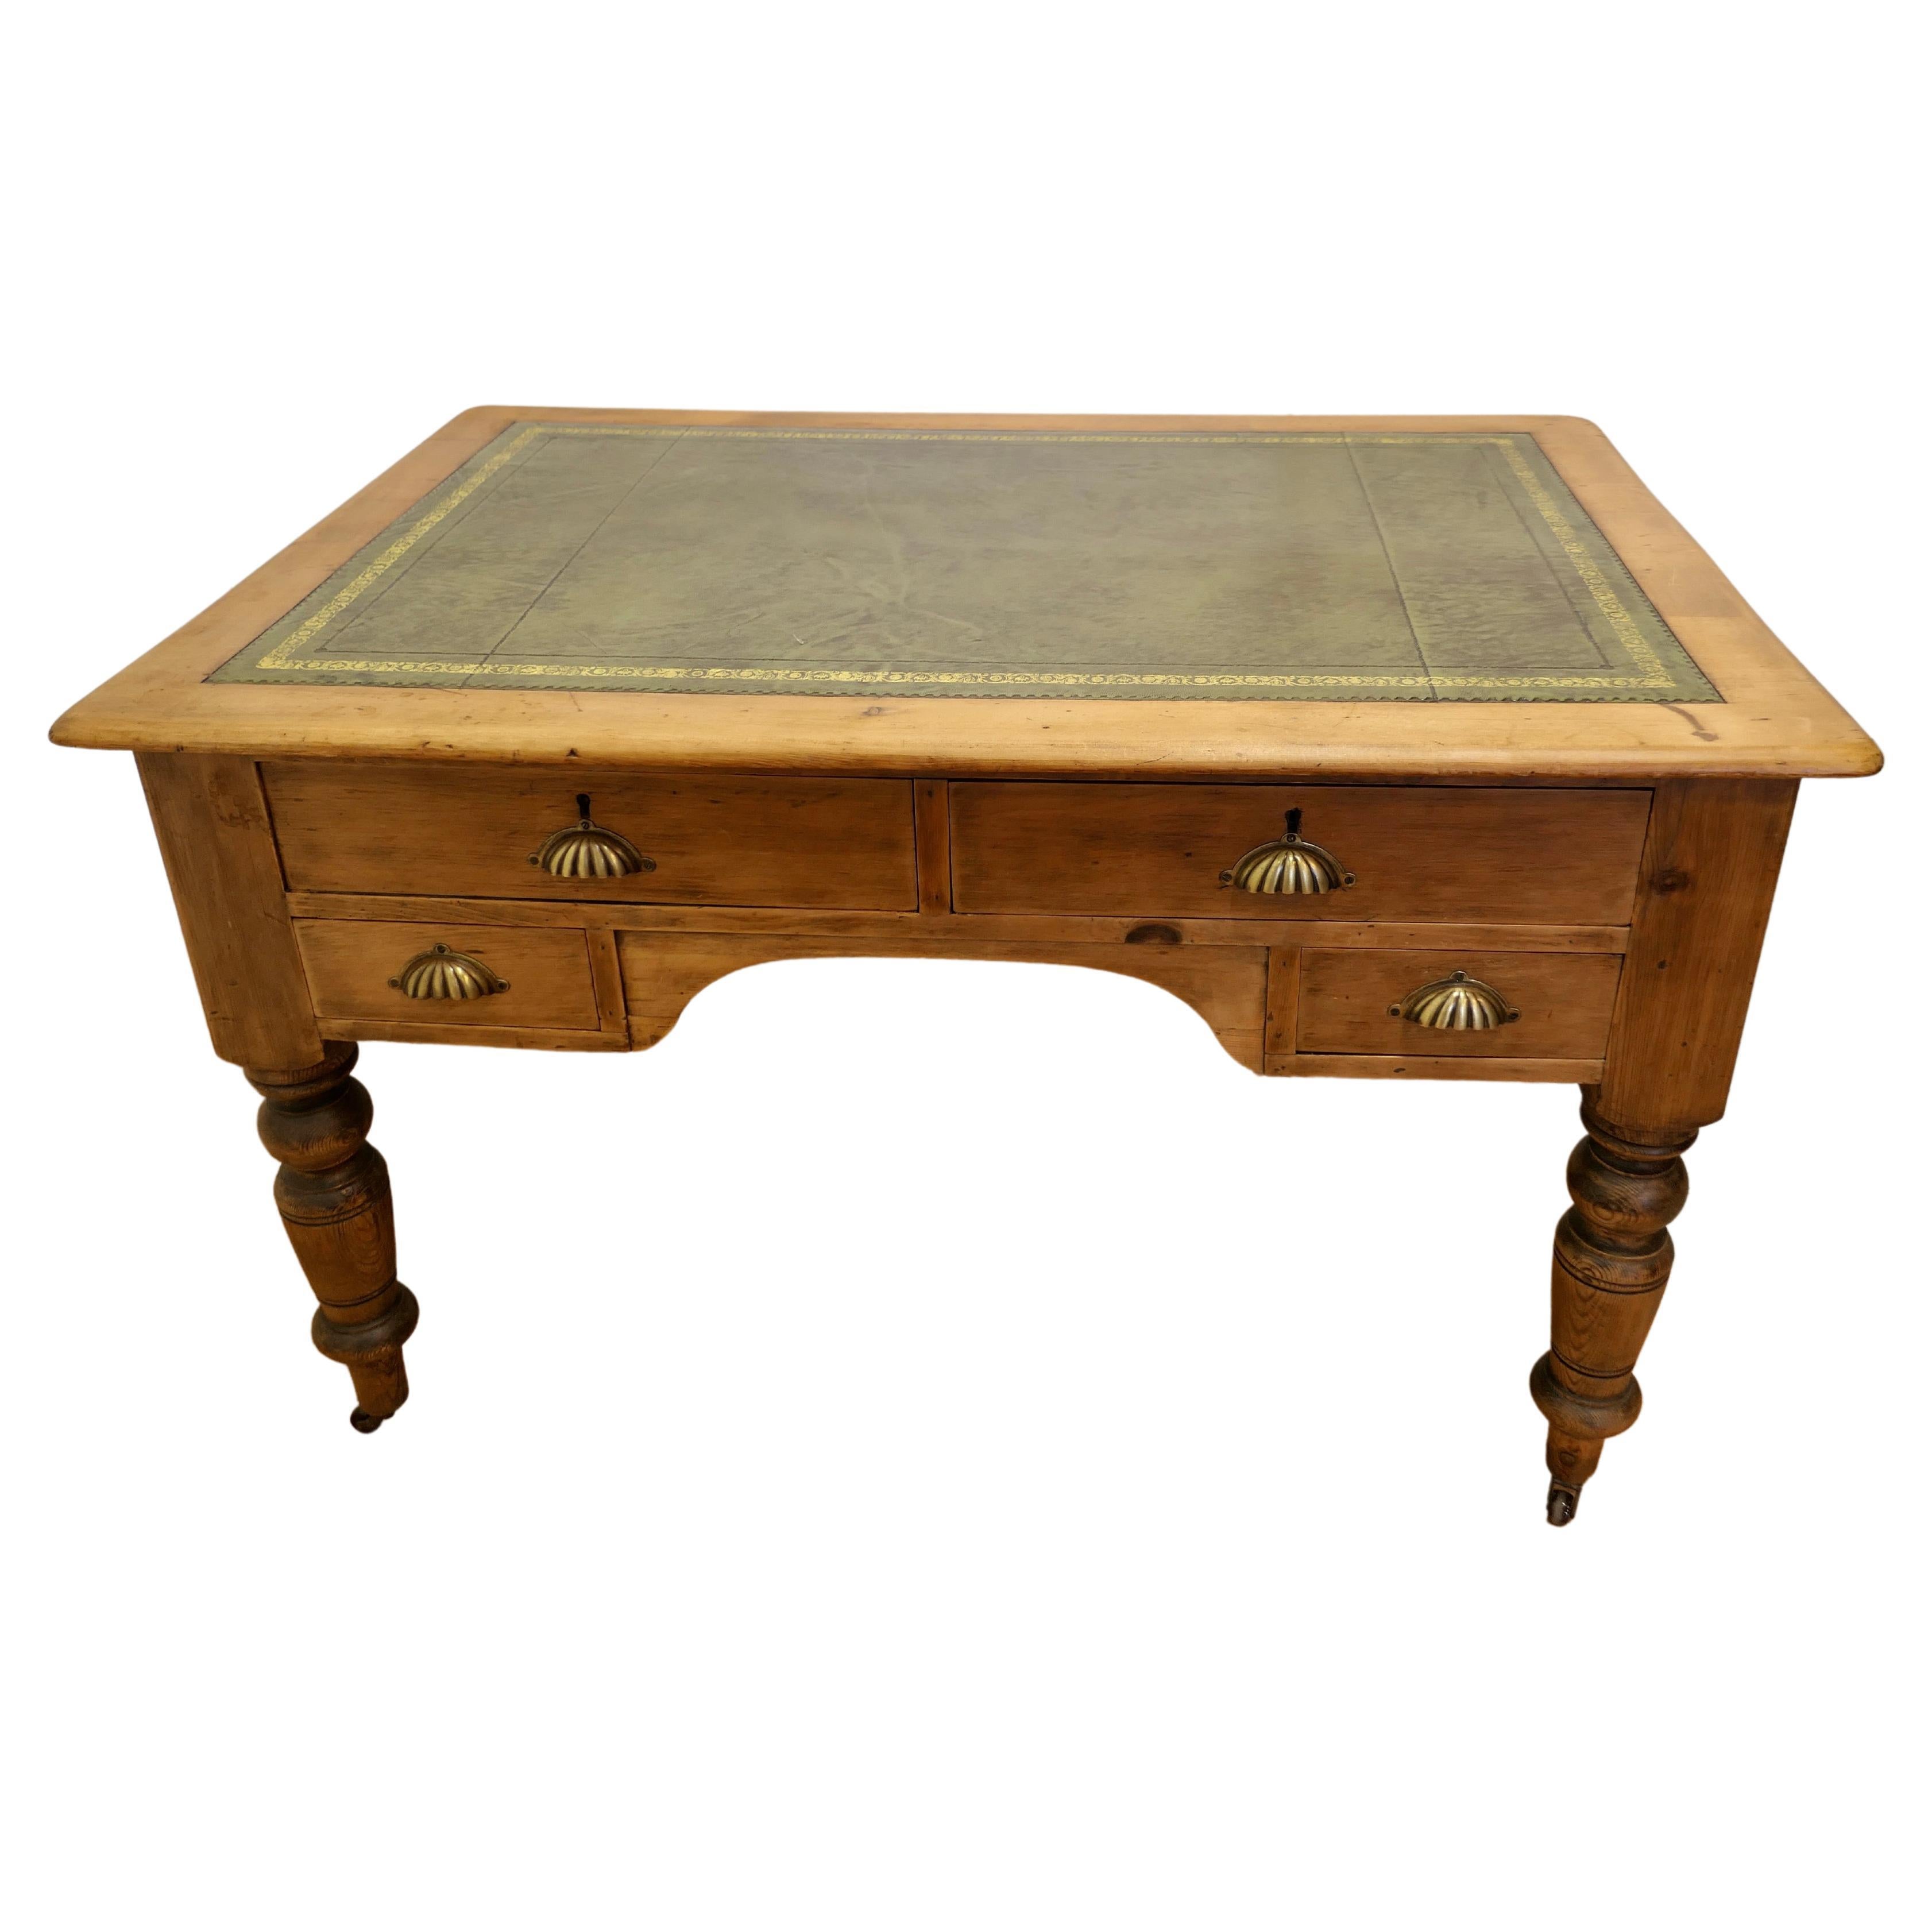 Antique Pine Leather Top Partners Desk, Library Table